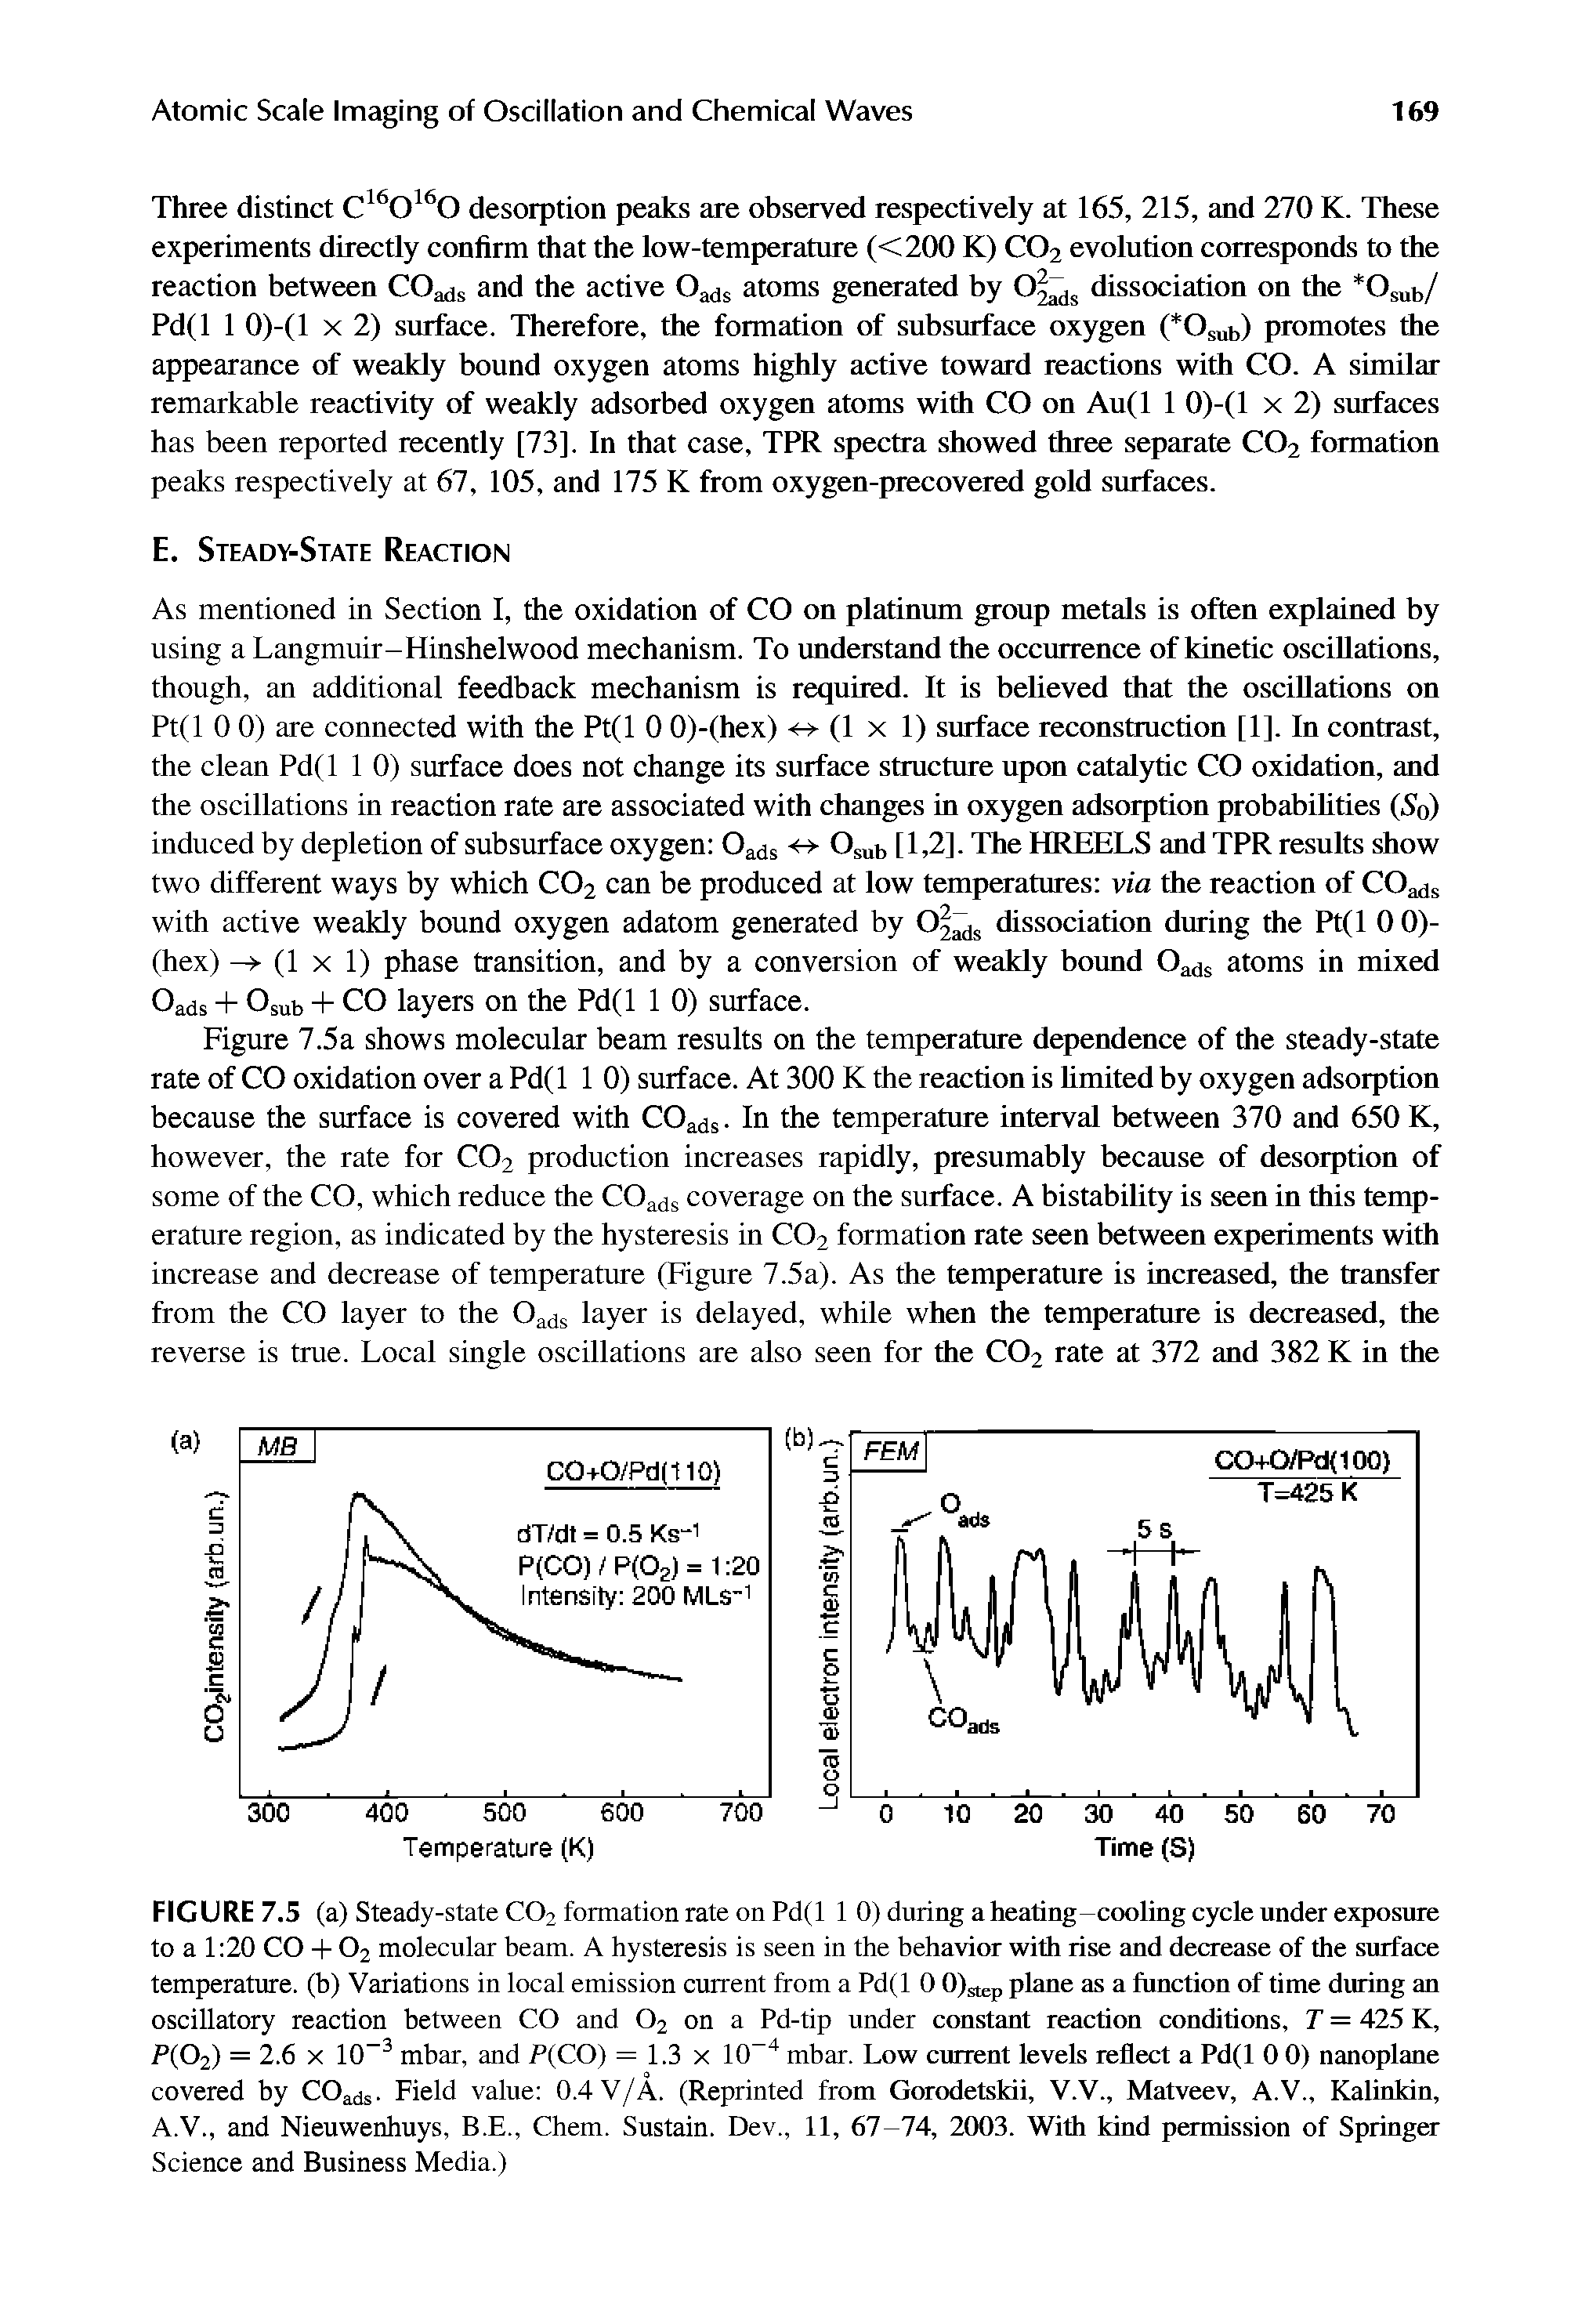 Figure 7.5a shows molecular beam results on the temperature dependence of the steady-state rate of CO oxidation over a Pd(l 1 0) surface. At 300 K the reaction is Umited by oxygen adsorption because the surface is covered with COads In the temperature interval between 370 and 650 K, however, the rate for CO2 production increases rapidly, presumably because of desorption of some of the CO, which reduce the COads coverage on the surface. A bistability is seen in this temperature region, as indicated by the hysteresis in CO2 formation rate seen between experiments with increase and decrease of temperature (Figure 7.5a). As the temperature is increased, the transfer from the CO layer to the Oads layer is delayed, while when the temperature is decreased, the reverse is true. Local single oscillations are also seen for the CO2 rate at 372 and 382 K in the...